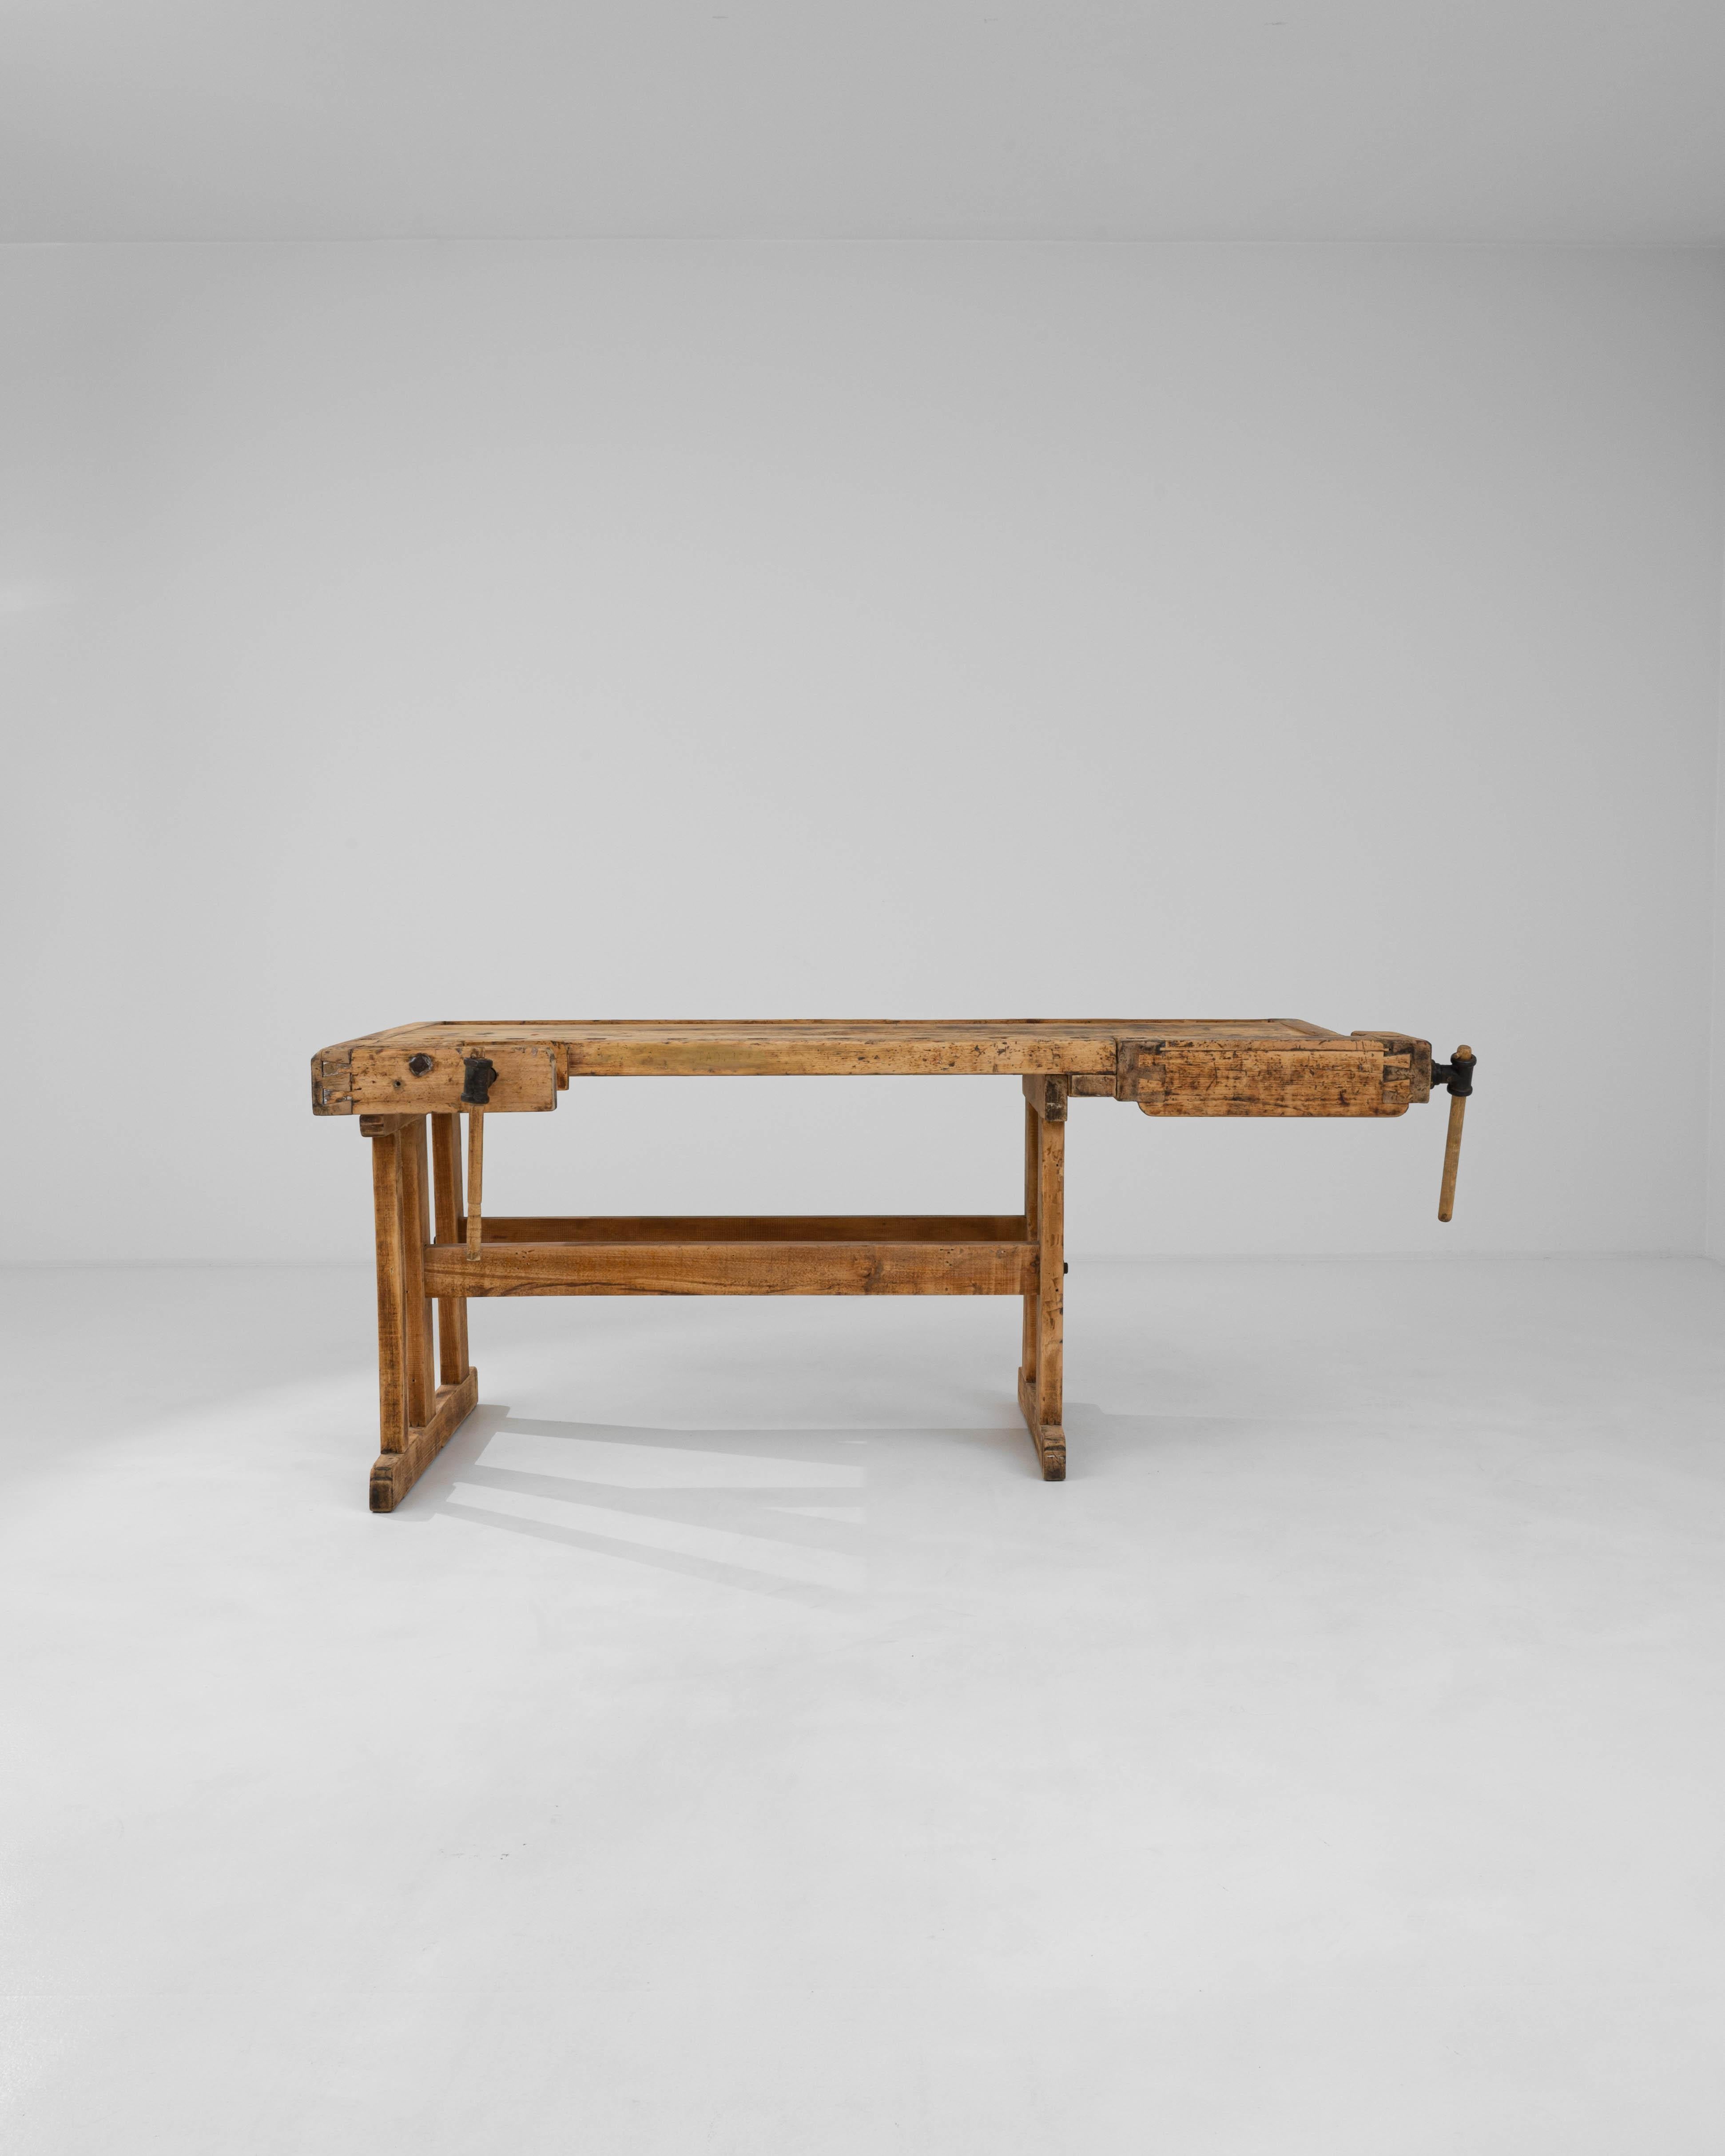 With its workmanlike design and warm natural finish, this vintage wooden table makes a striking Industrial accent. Built in Czechia in the 20th century, this piece would have originally been used as a carpenter’s work bench; the impressive iron